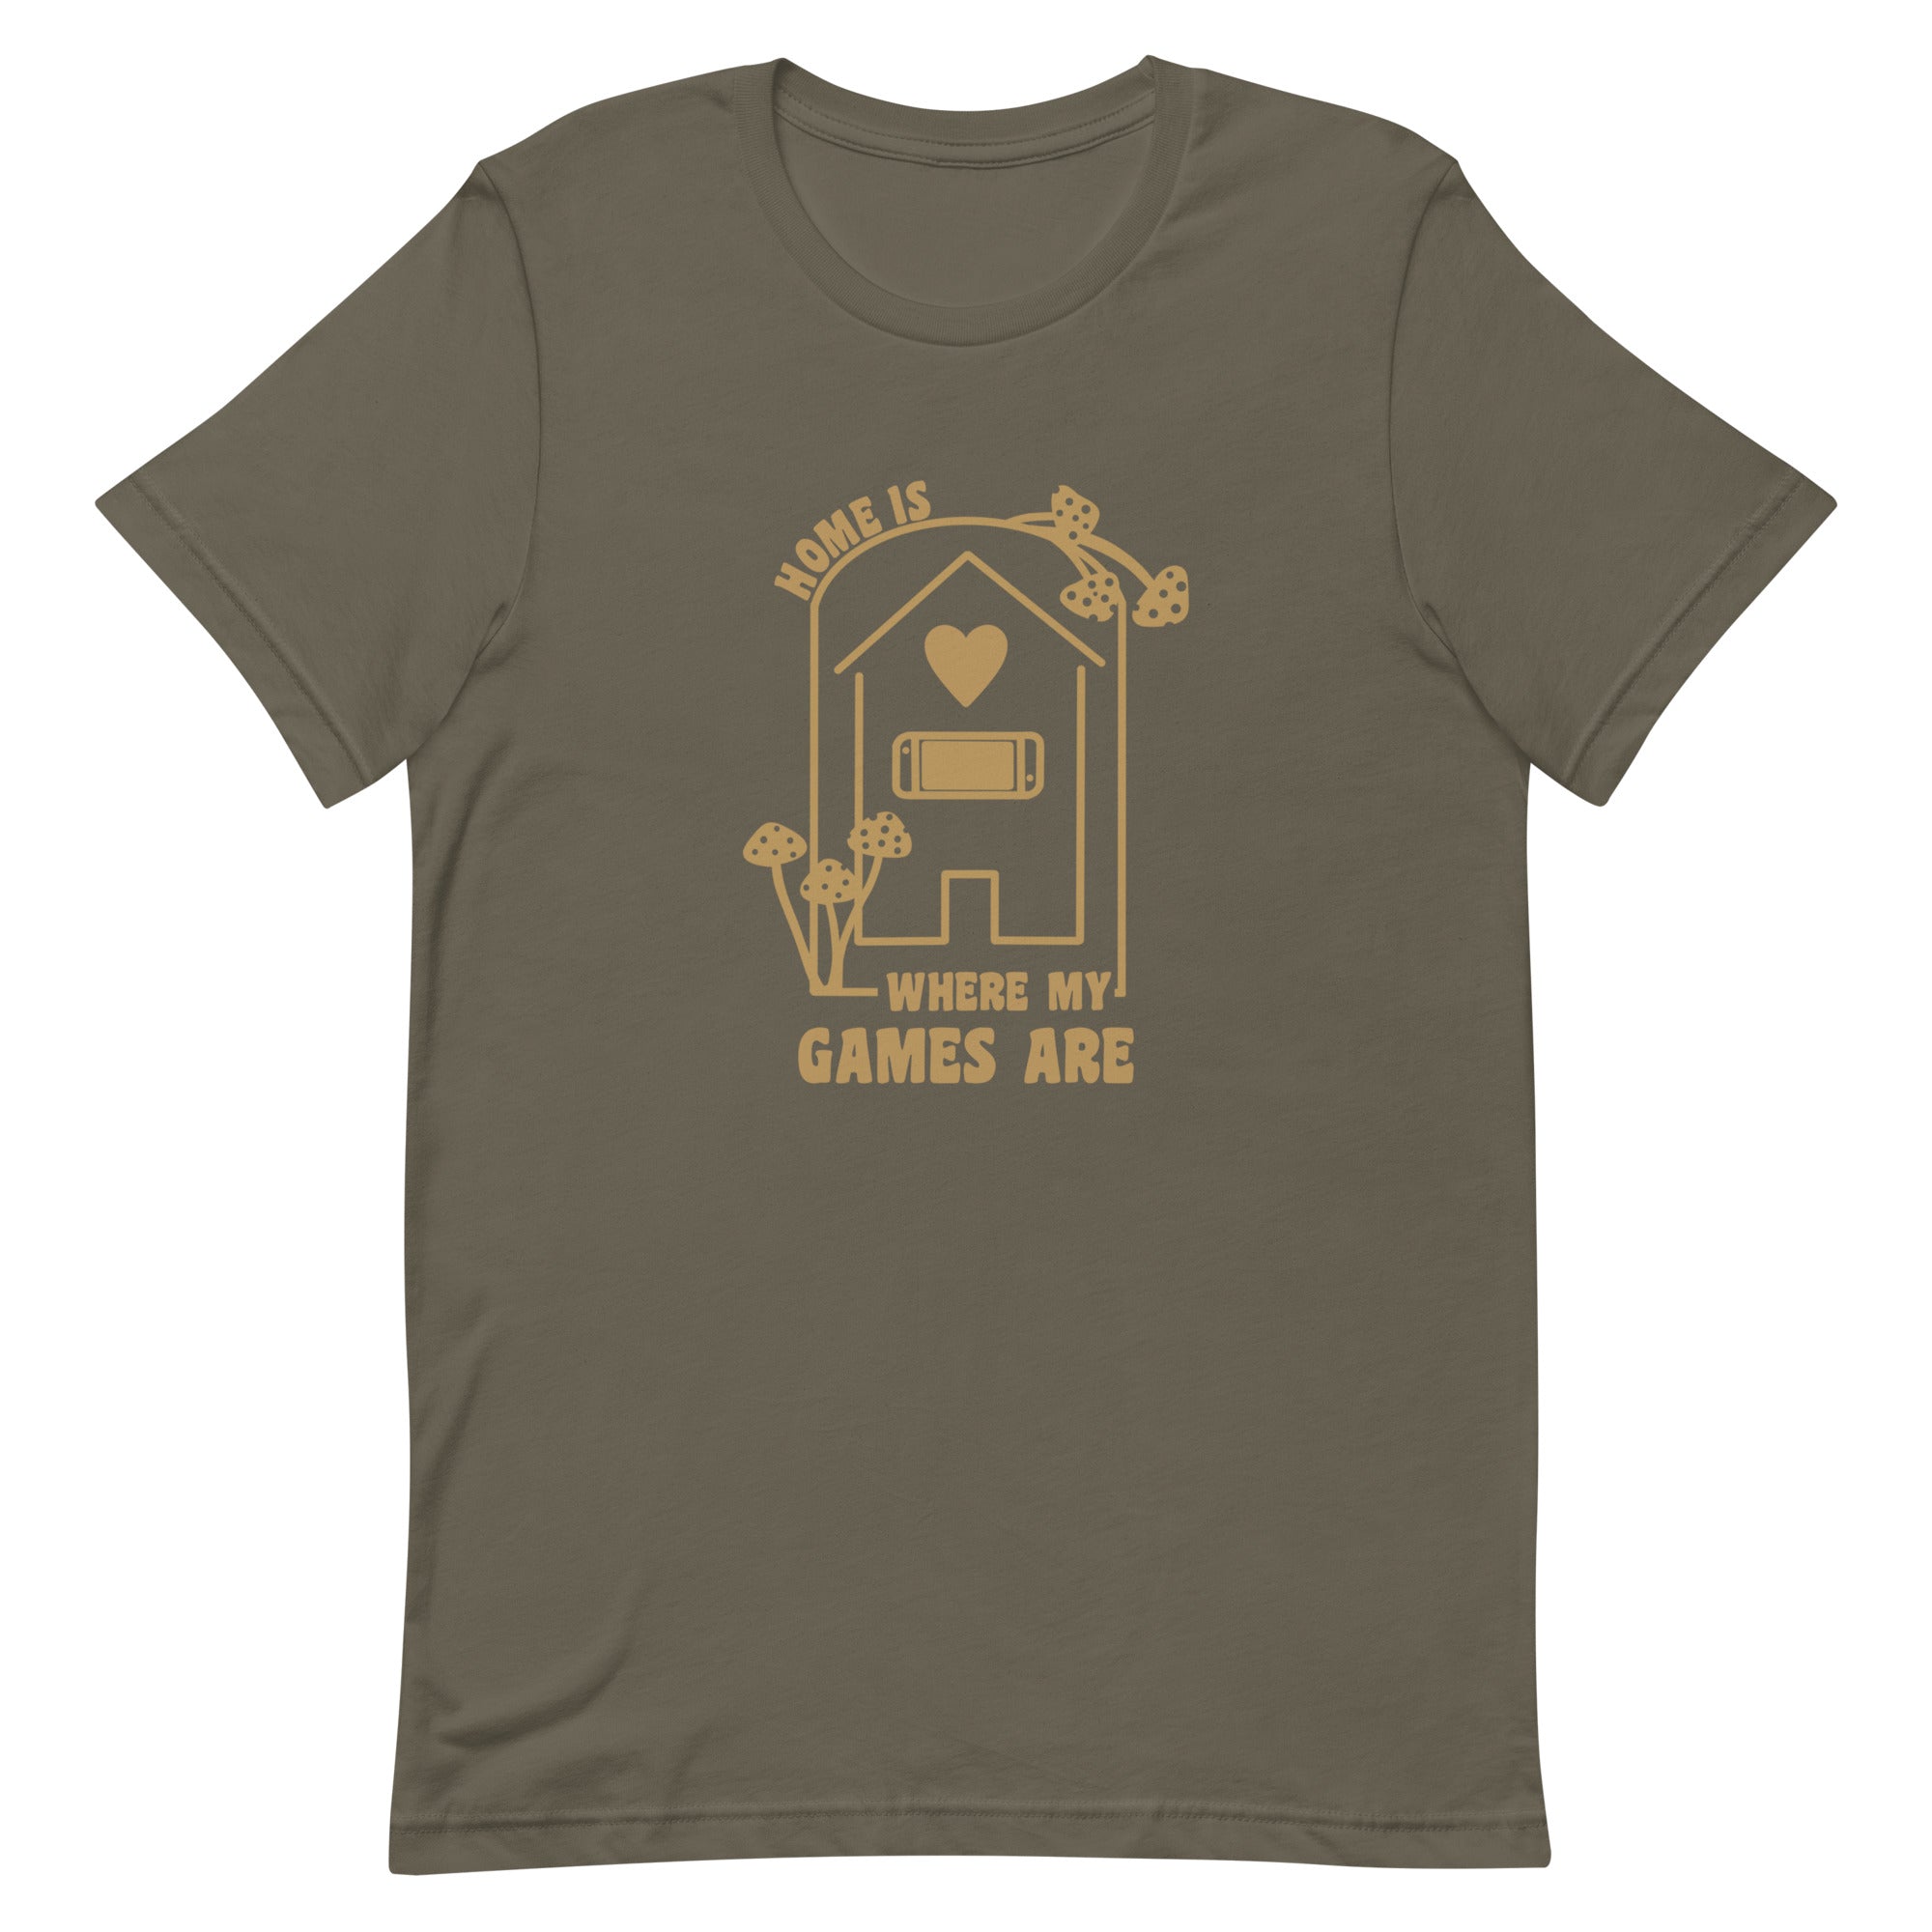 Where my Games Are | Unisex t-shirt | Cozy Gamer Threads and Thistles Inventory Army S 